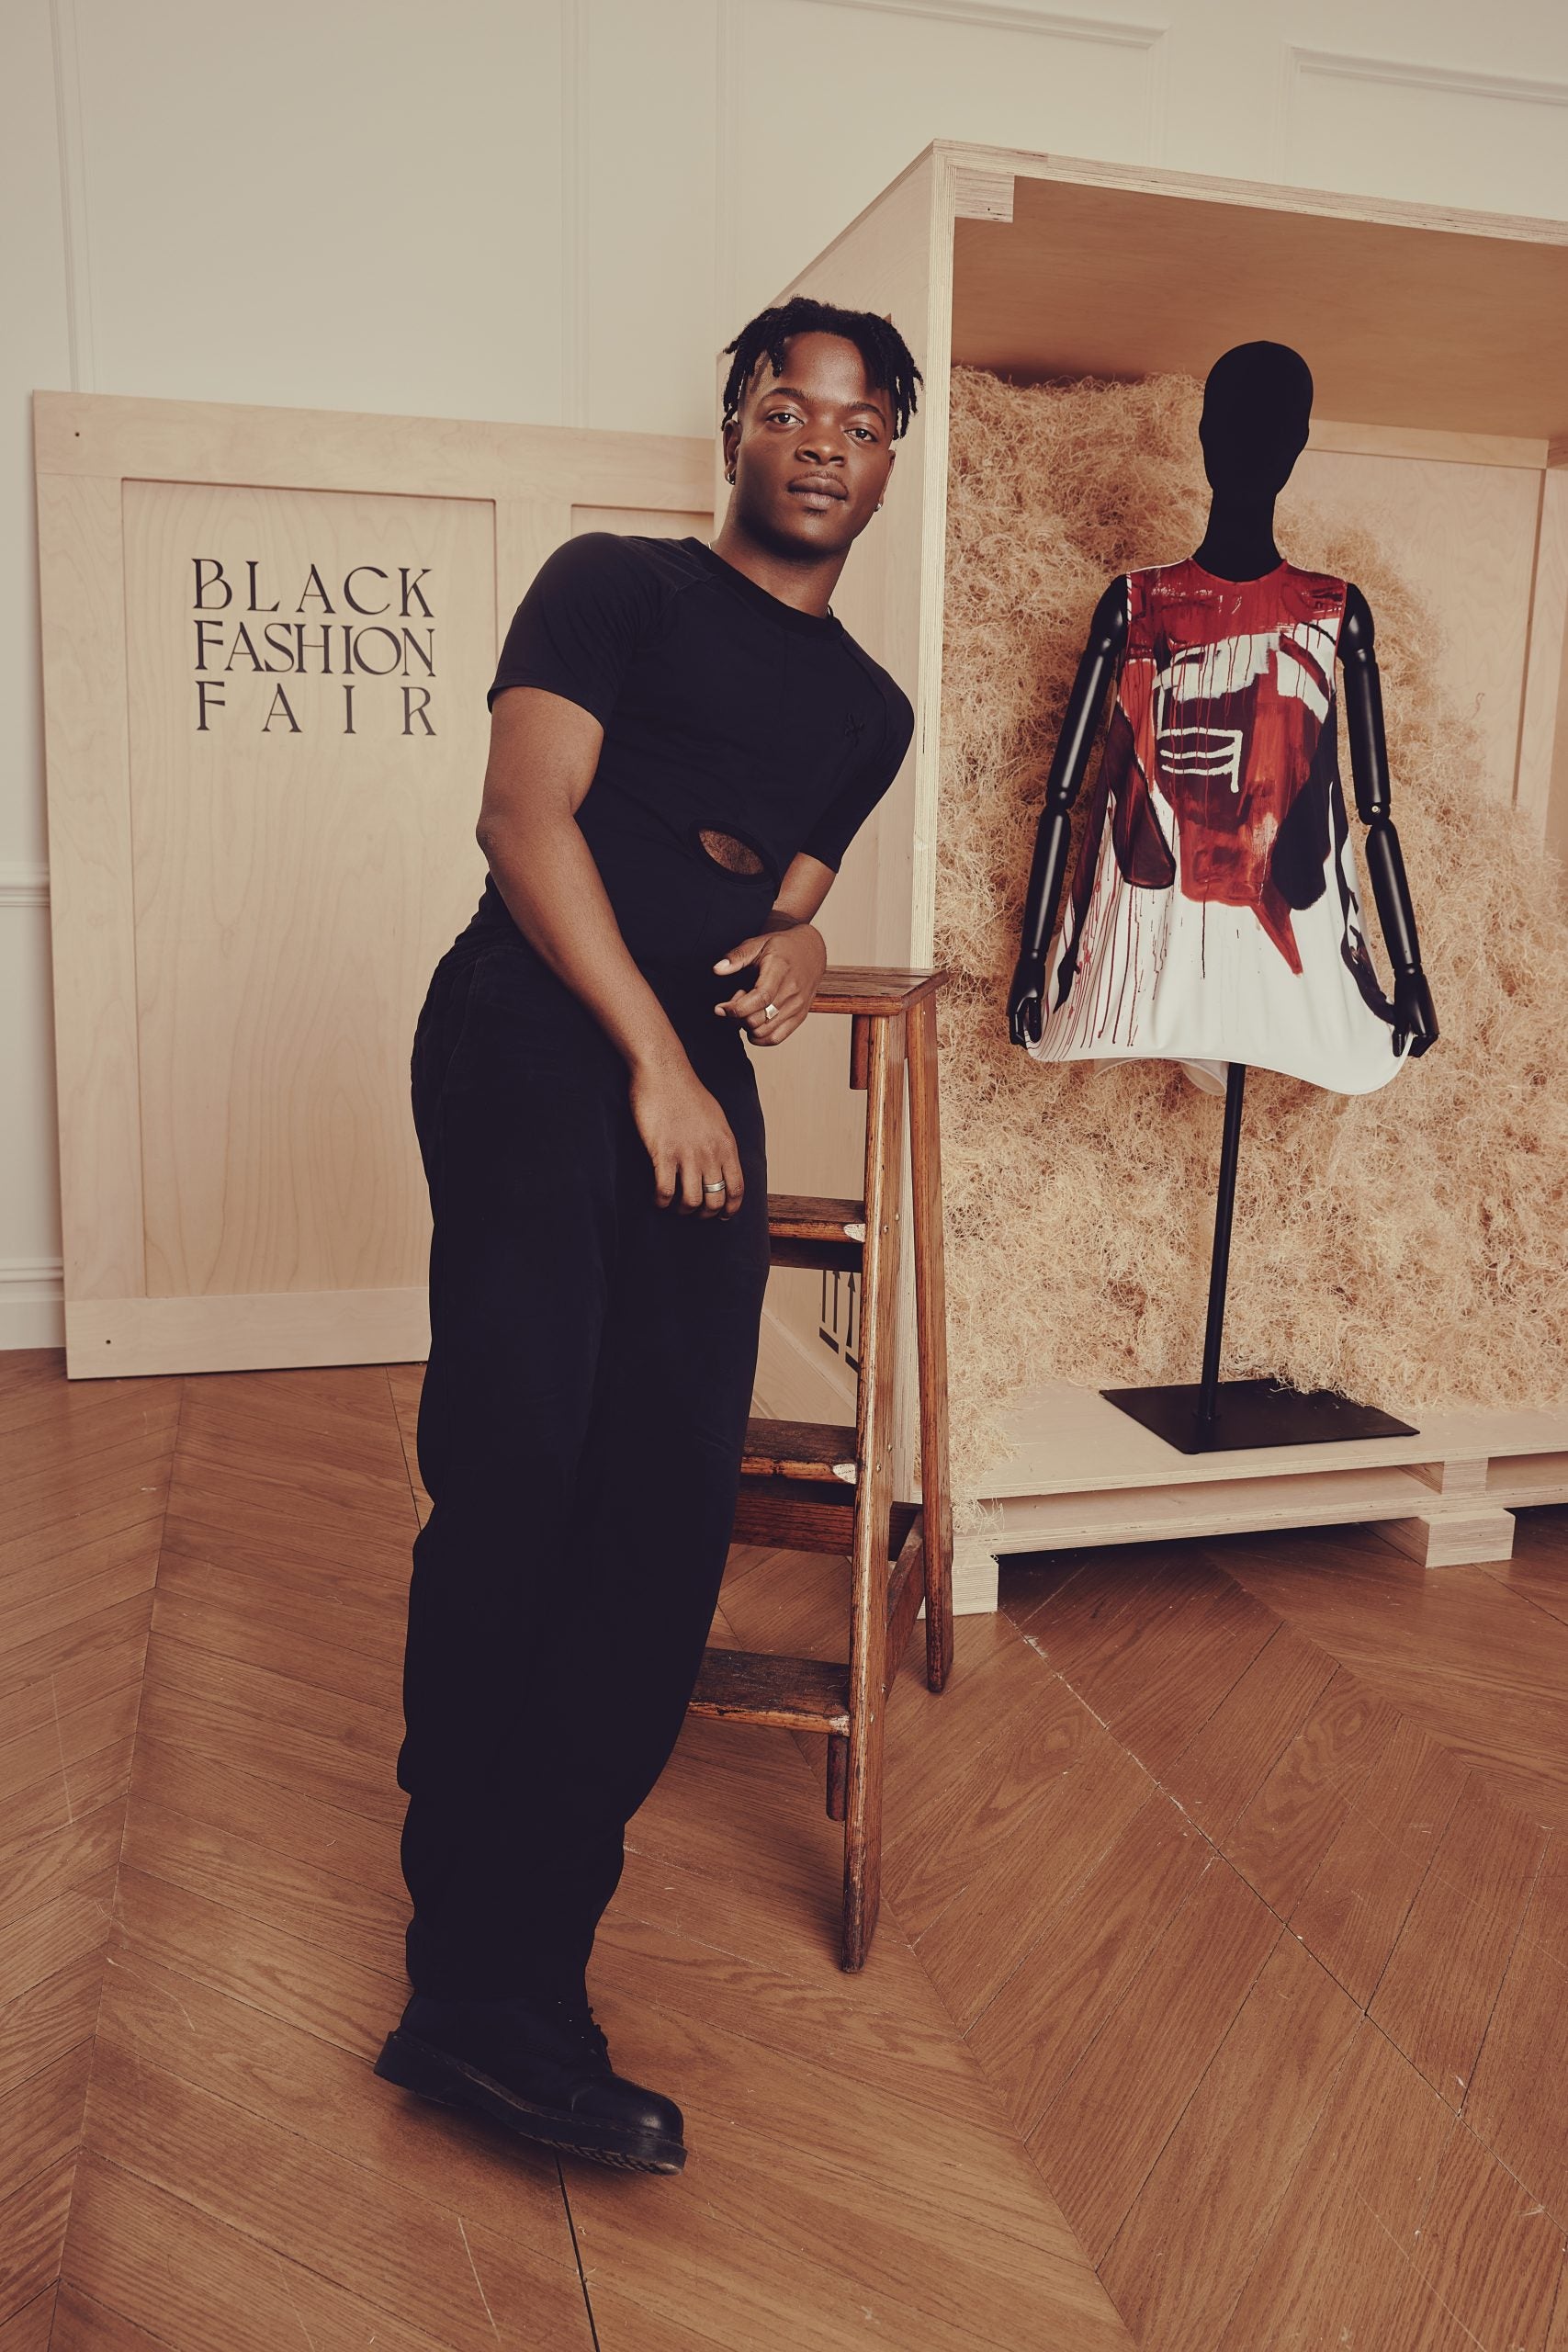 Those Who Dress Better: Black Fashion Fair Celebrates The Style And Legacy Of Jean-Michel Basquiat